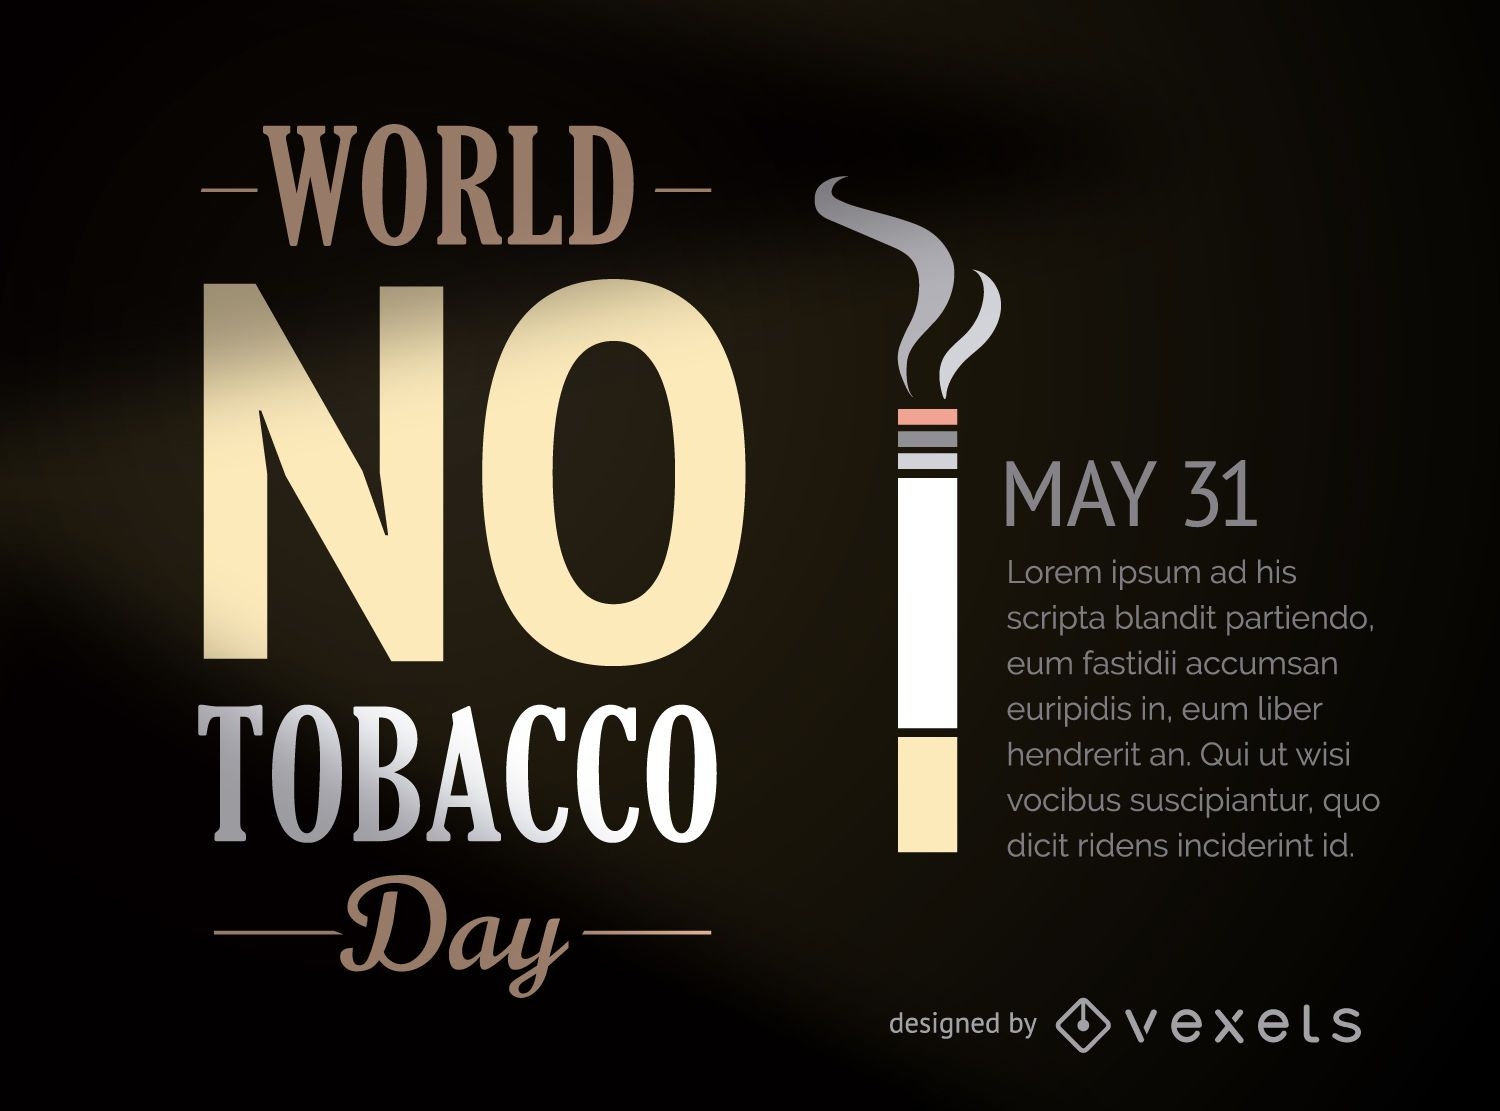 World no tabacco day banner